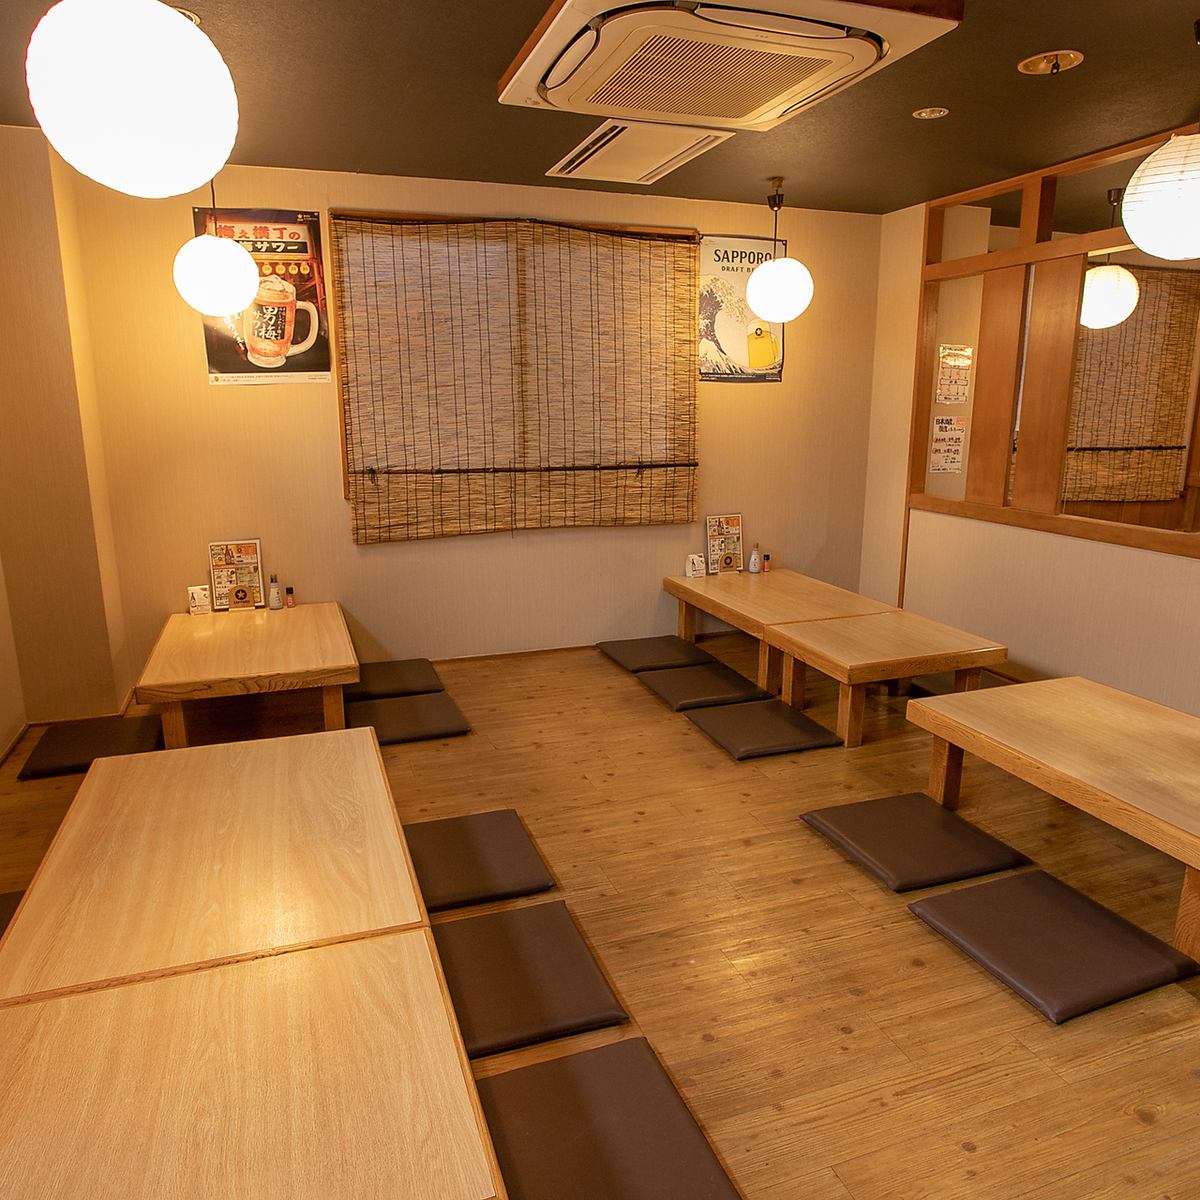 Reservations for 20 or more people are also welcome! We have tatami and table seats available!